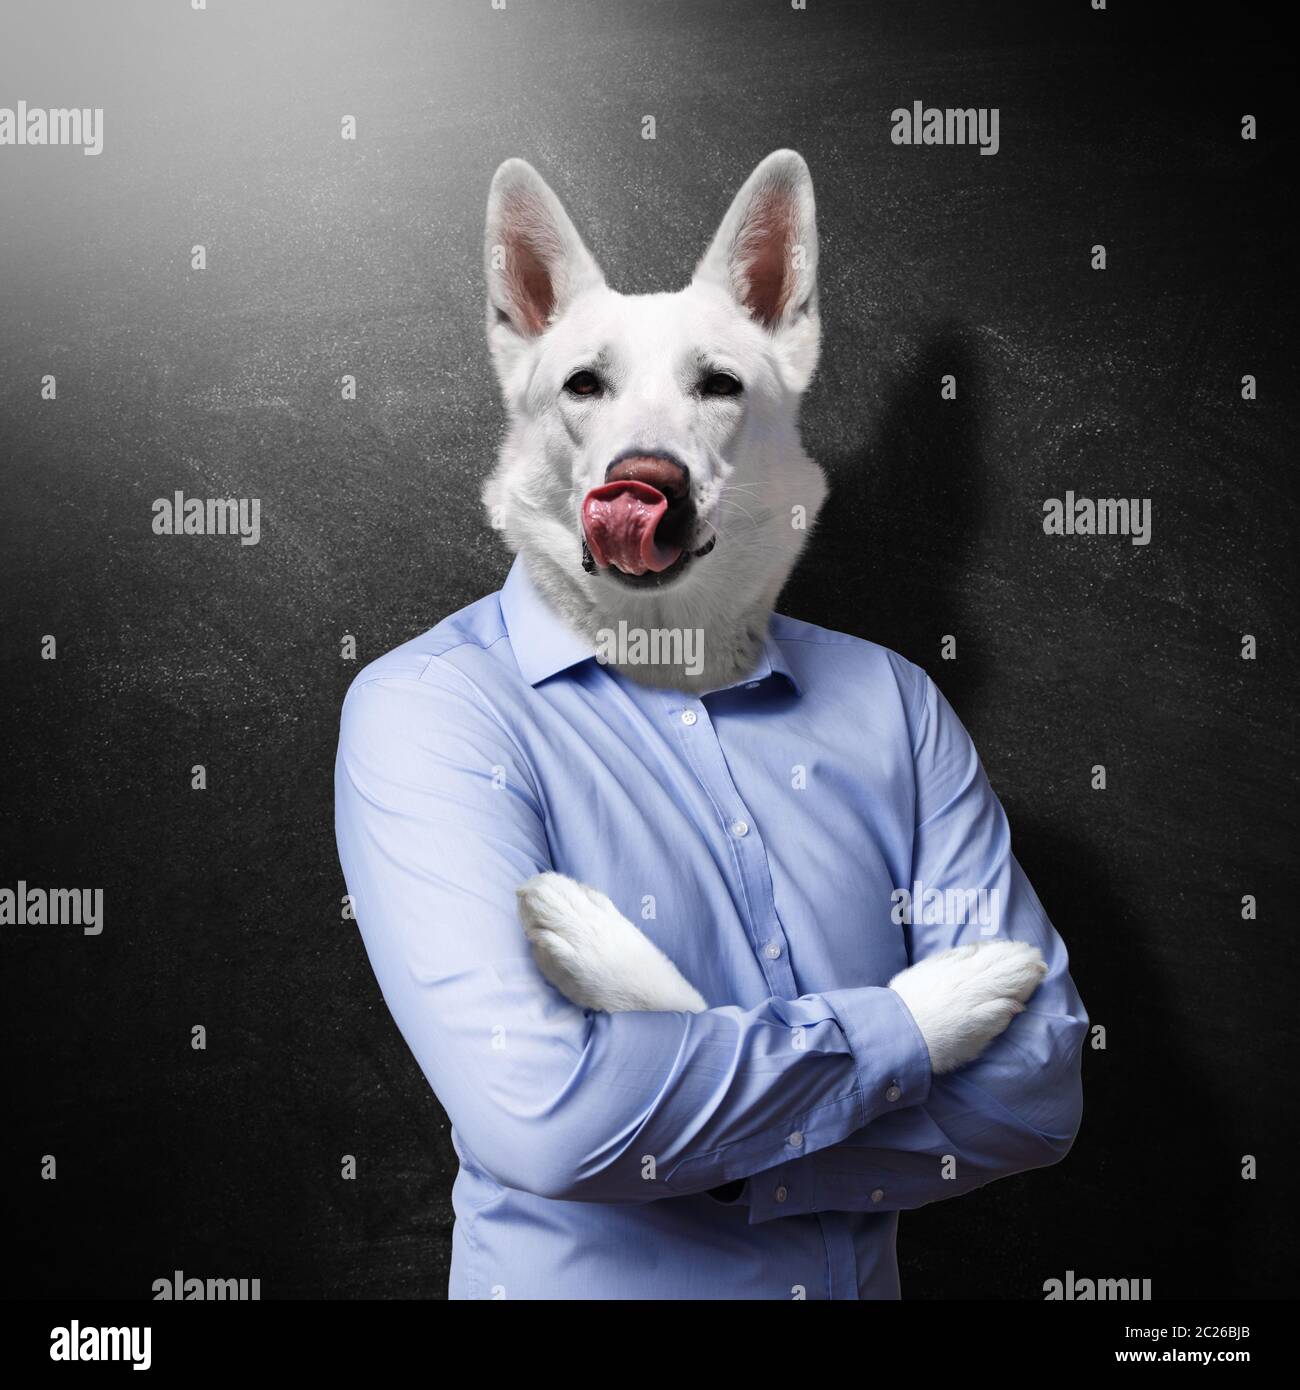 Animalistic hungry dog-man. Business and hunger concept. Stock Photo